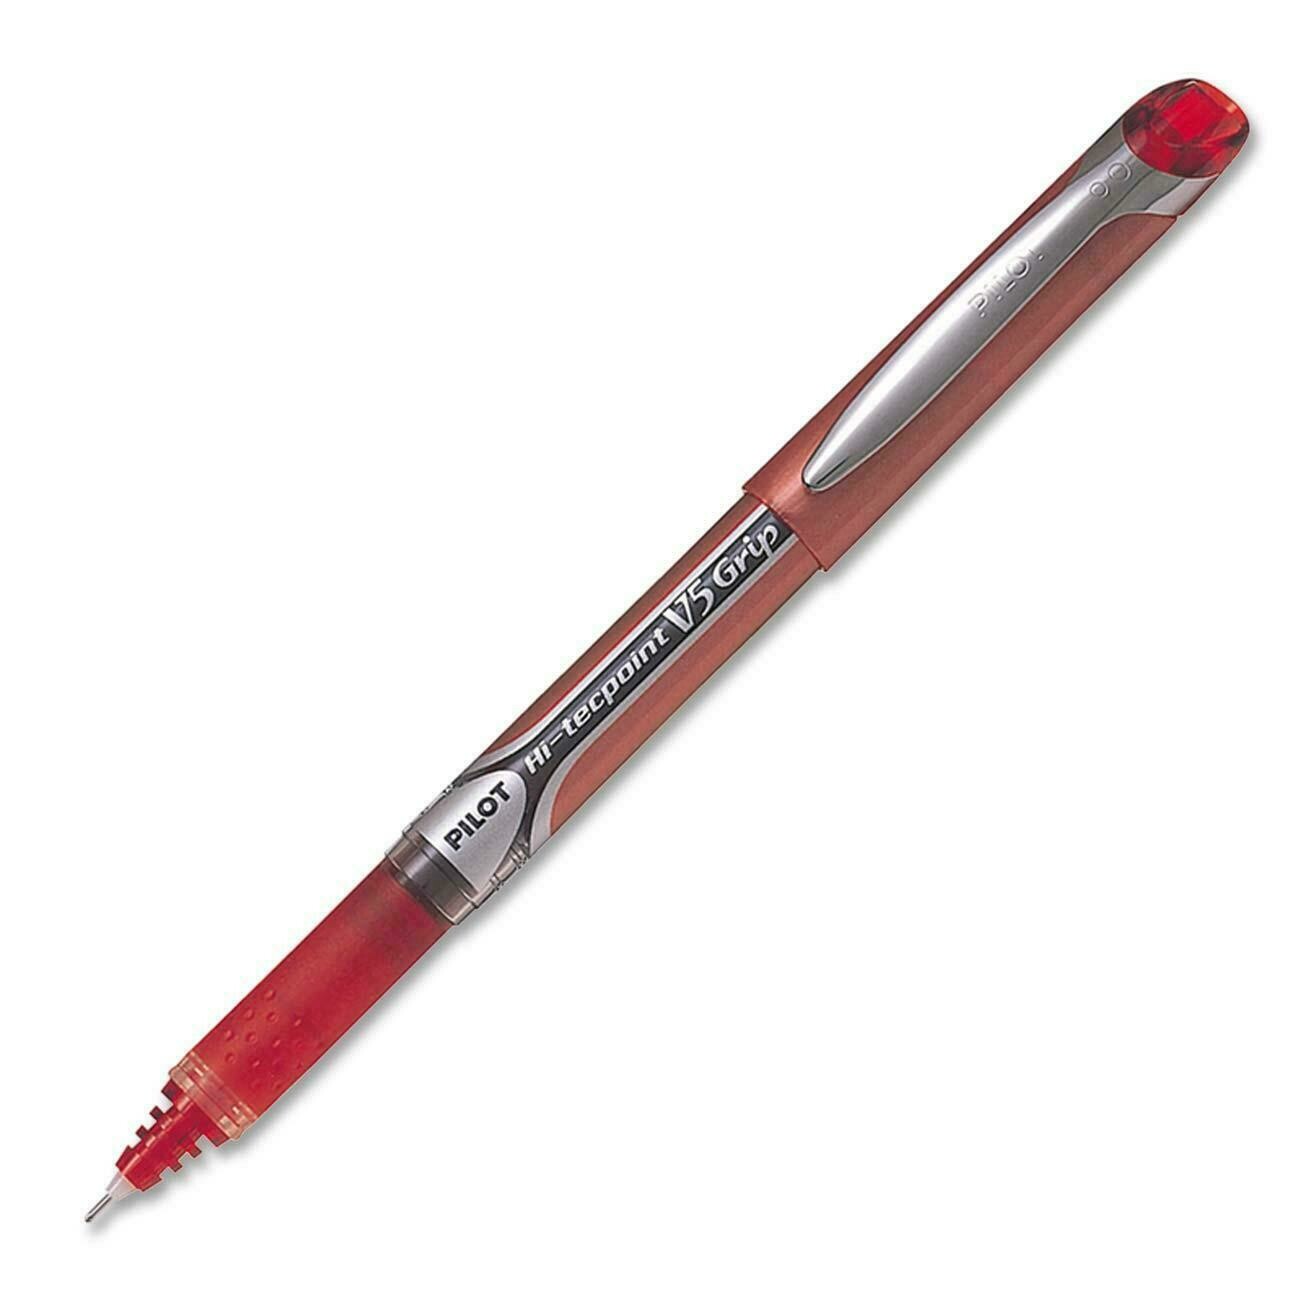 Pen, Needle Point Rollerball, Hi-Tecpoint V5 Red, Single, 0.5 Mm